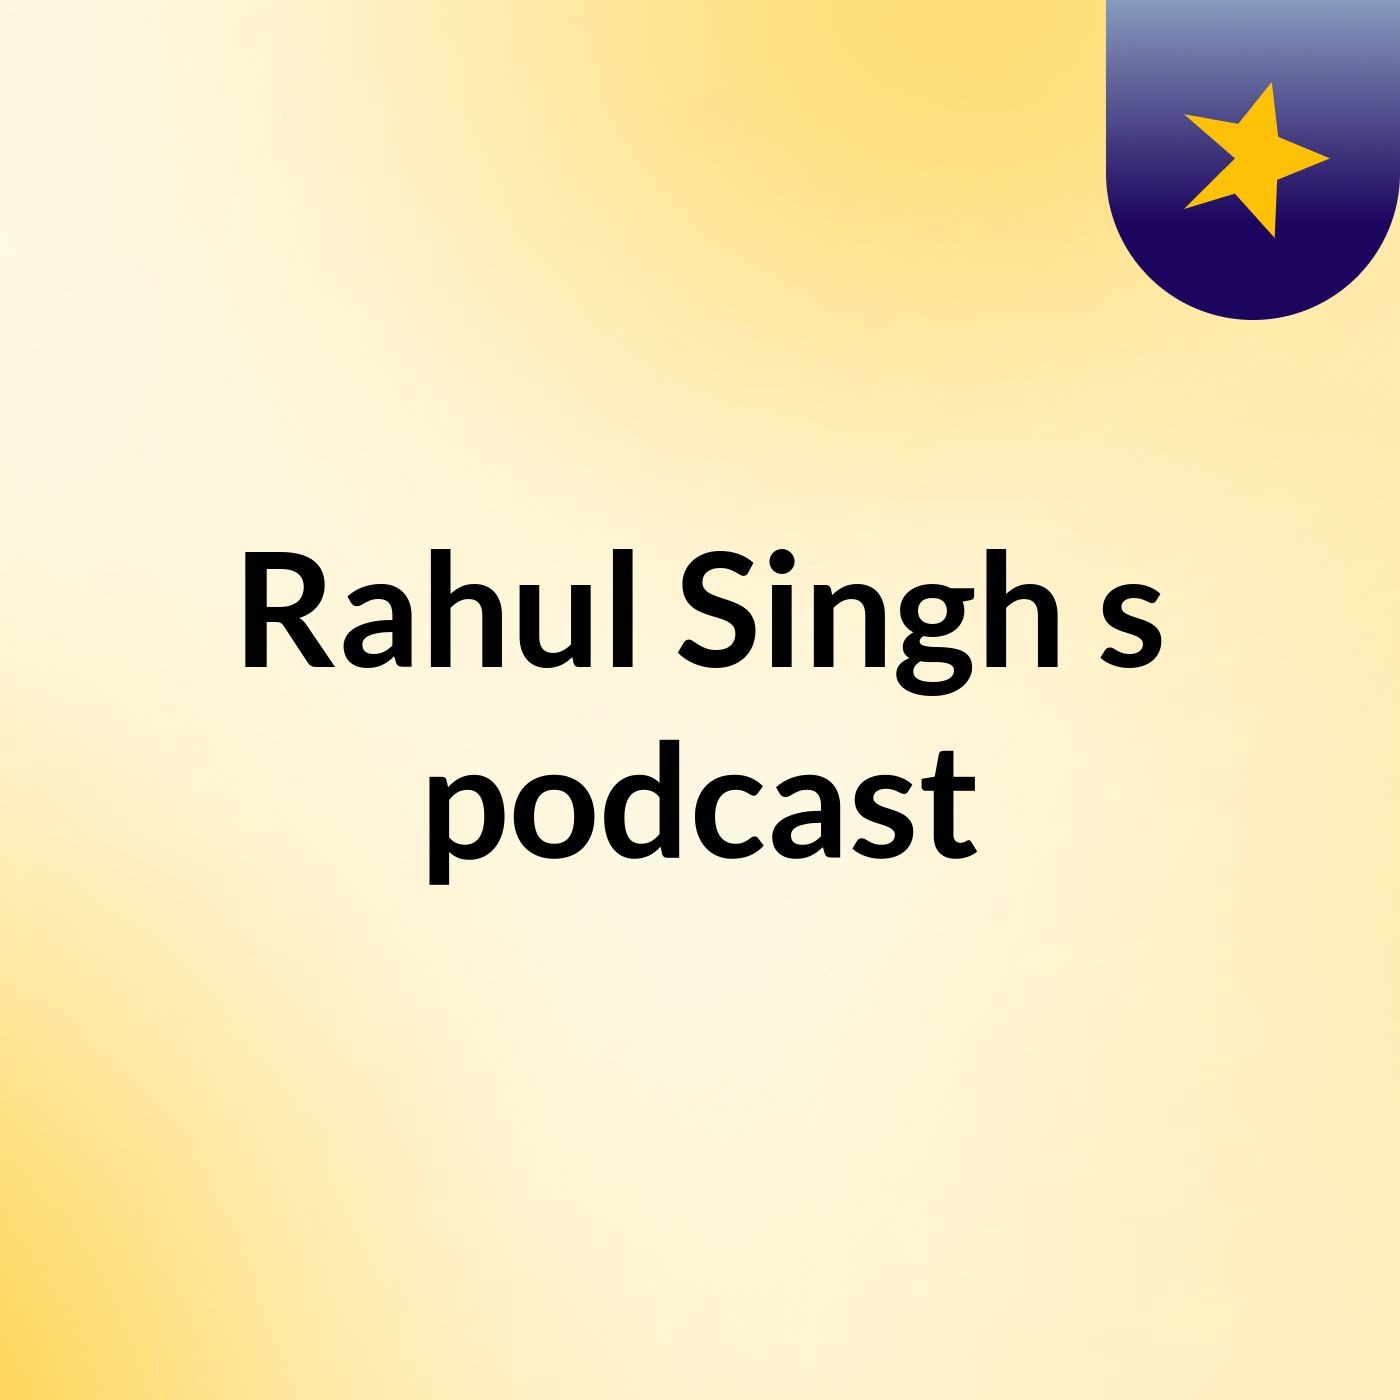 Episode 3 - Rahul Singh's podcast